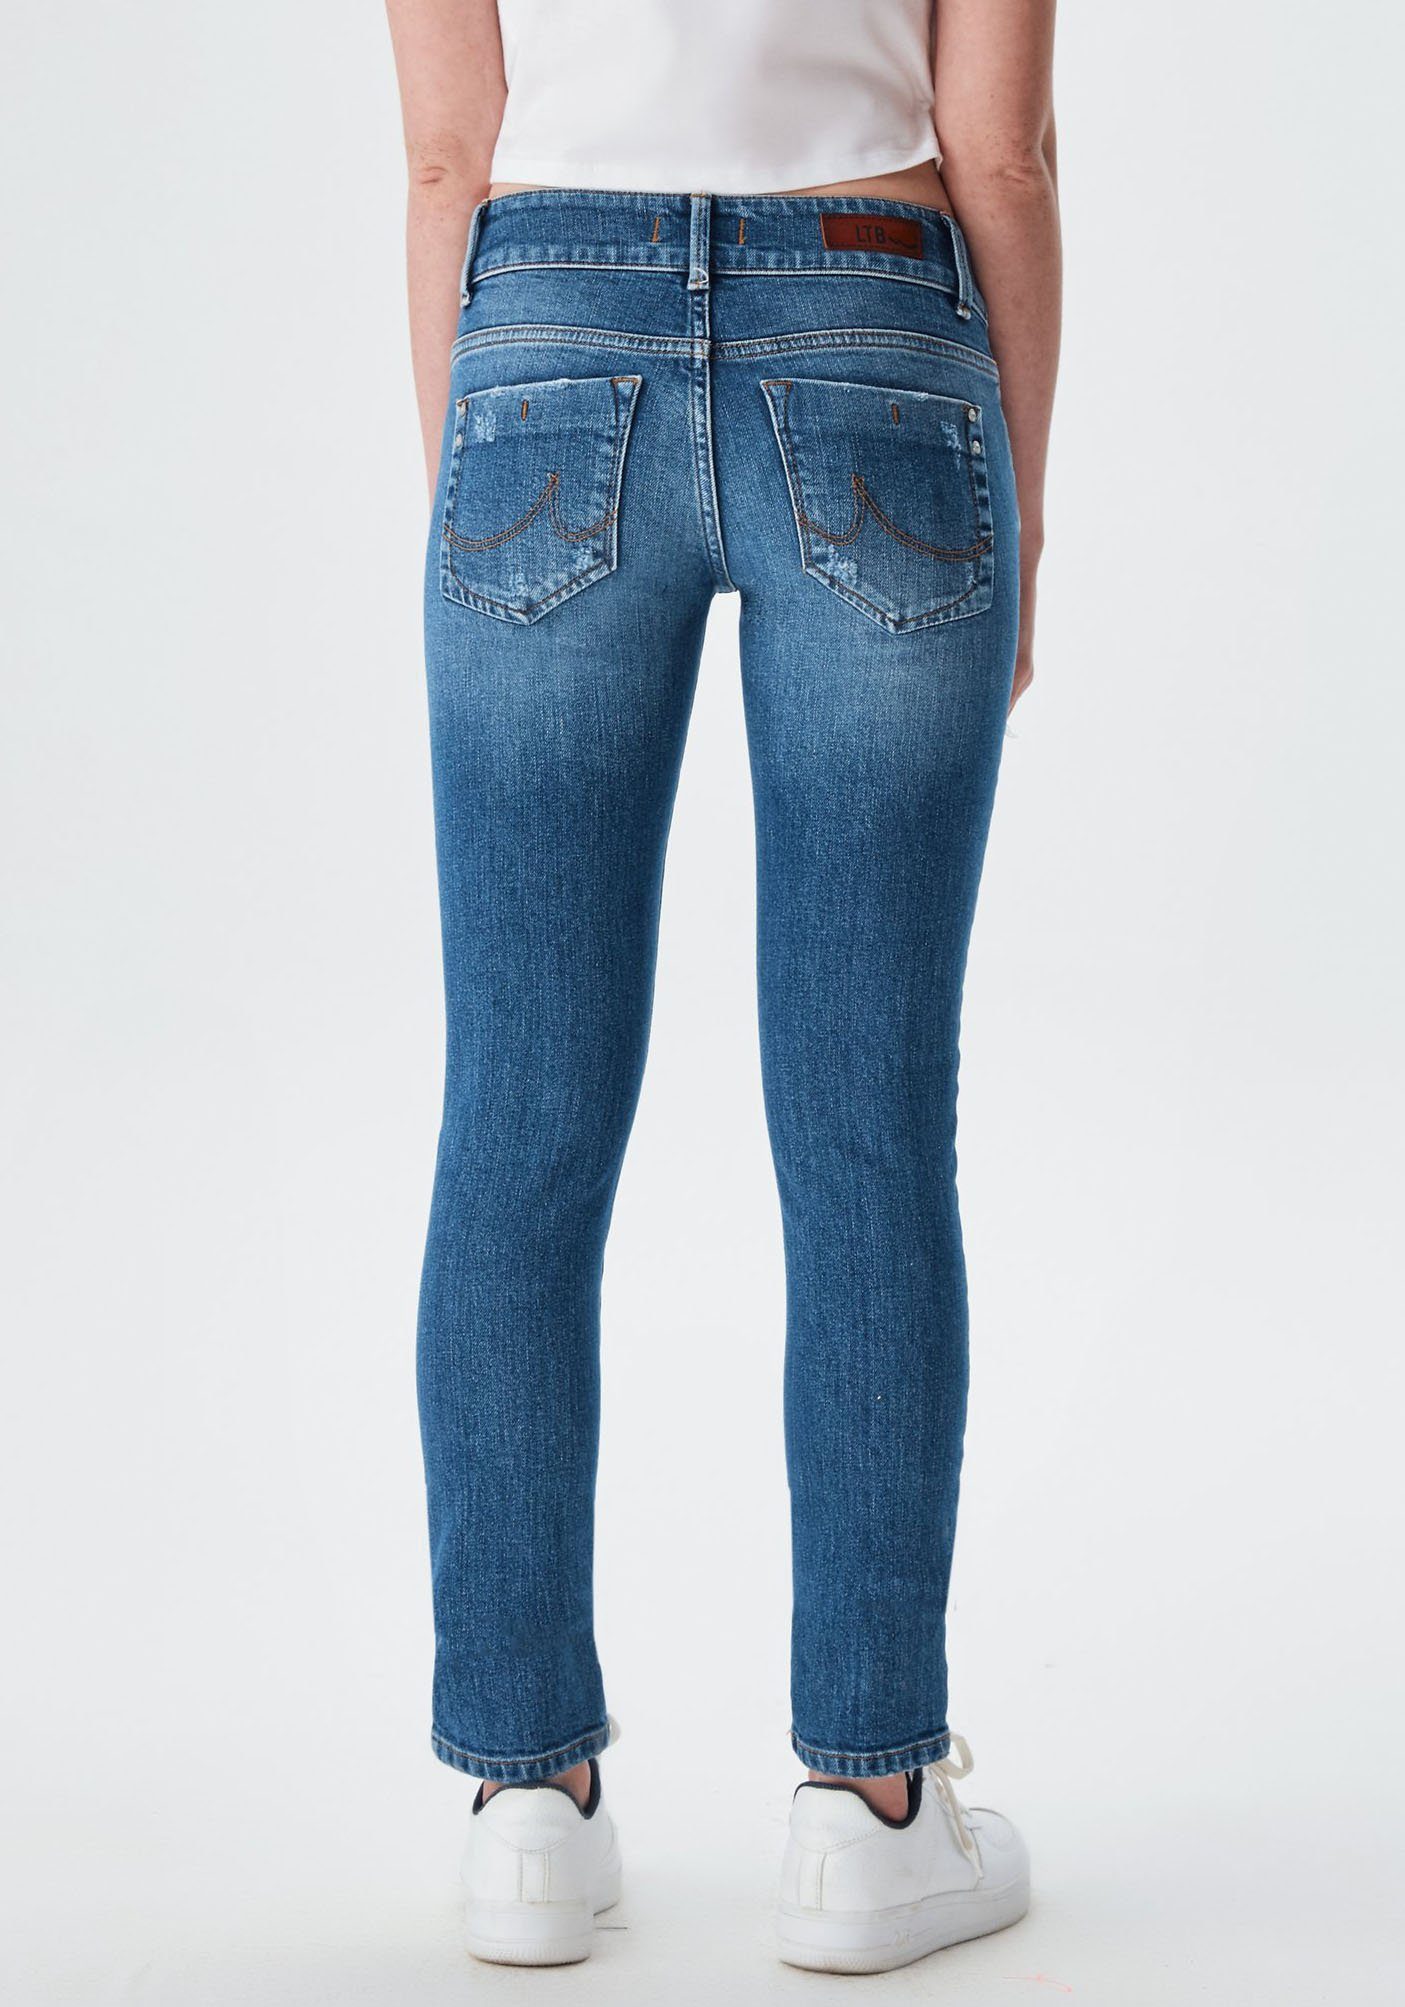 LTB Slim-fit-Jeans Molly mit doppelter Knopfleiste & Stretch, Modern  stitching details on back and front pockets